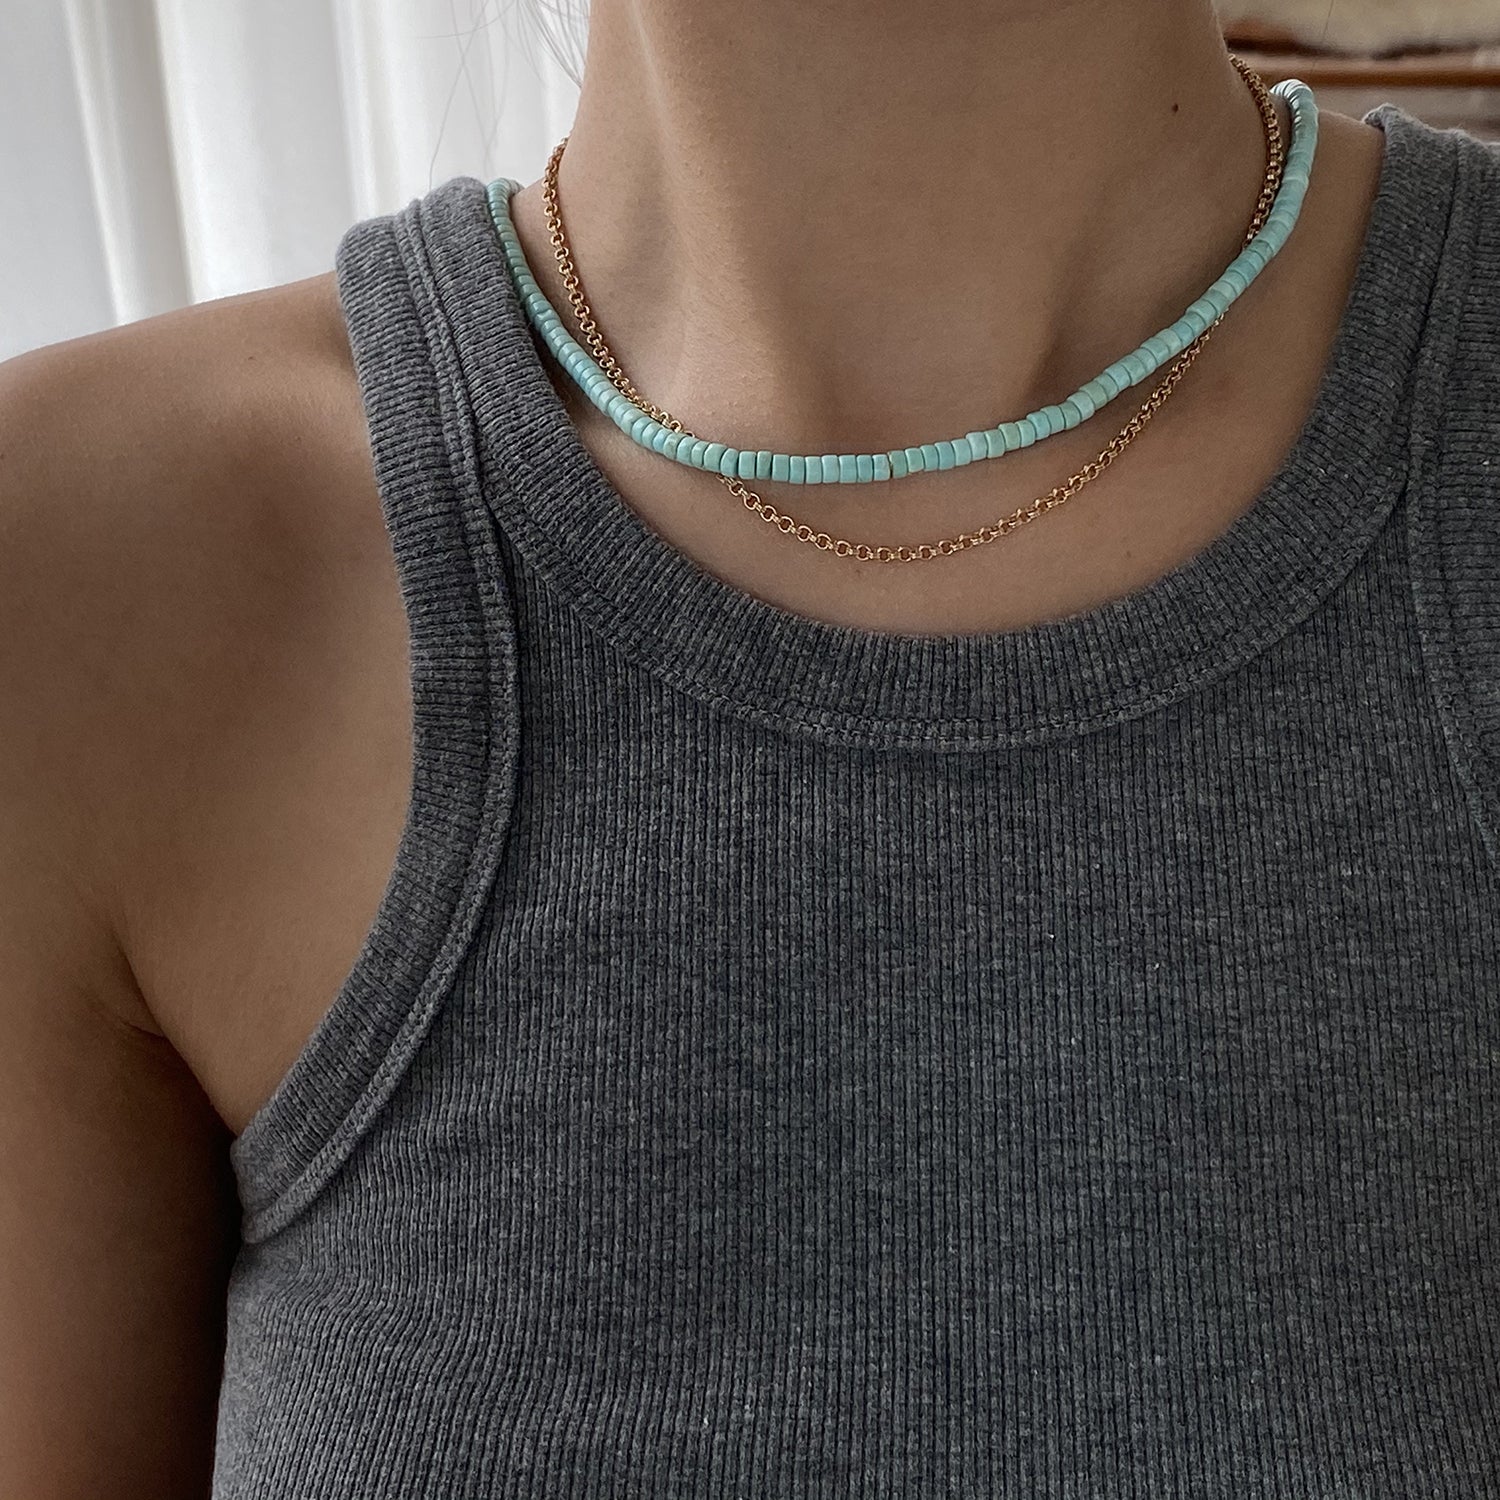 Light Blue Turquoise Natural Pearl Handmade Necklace